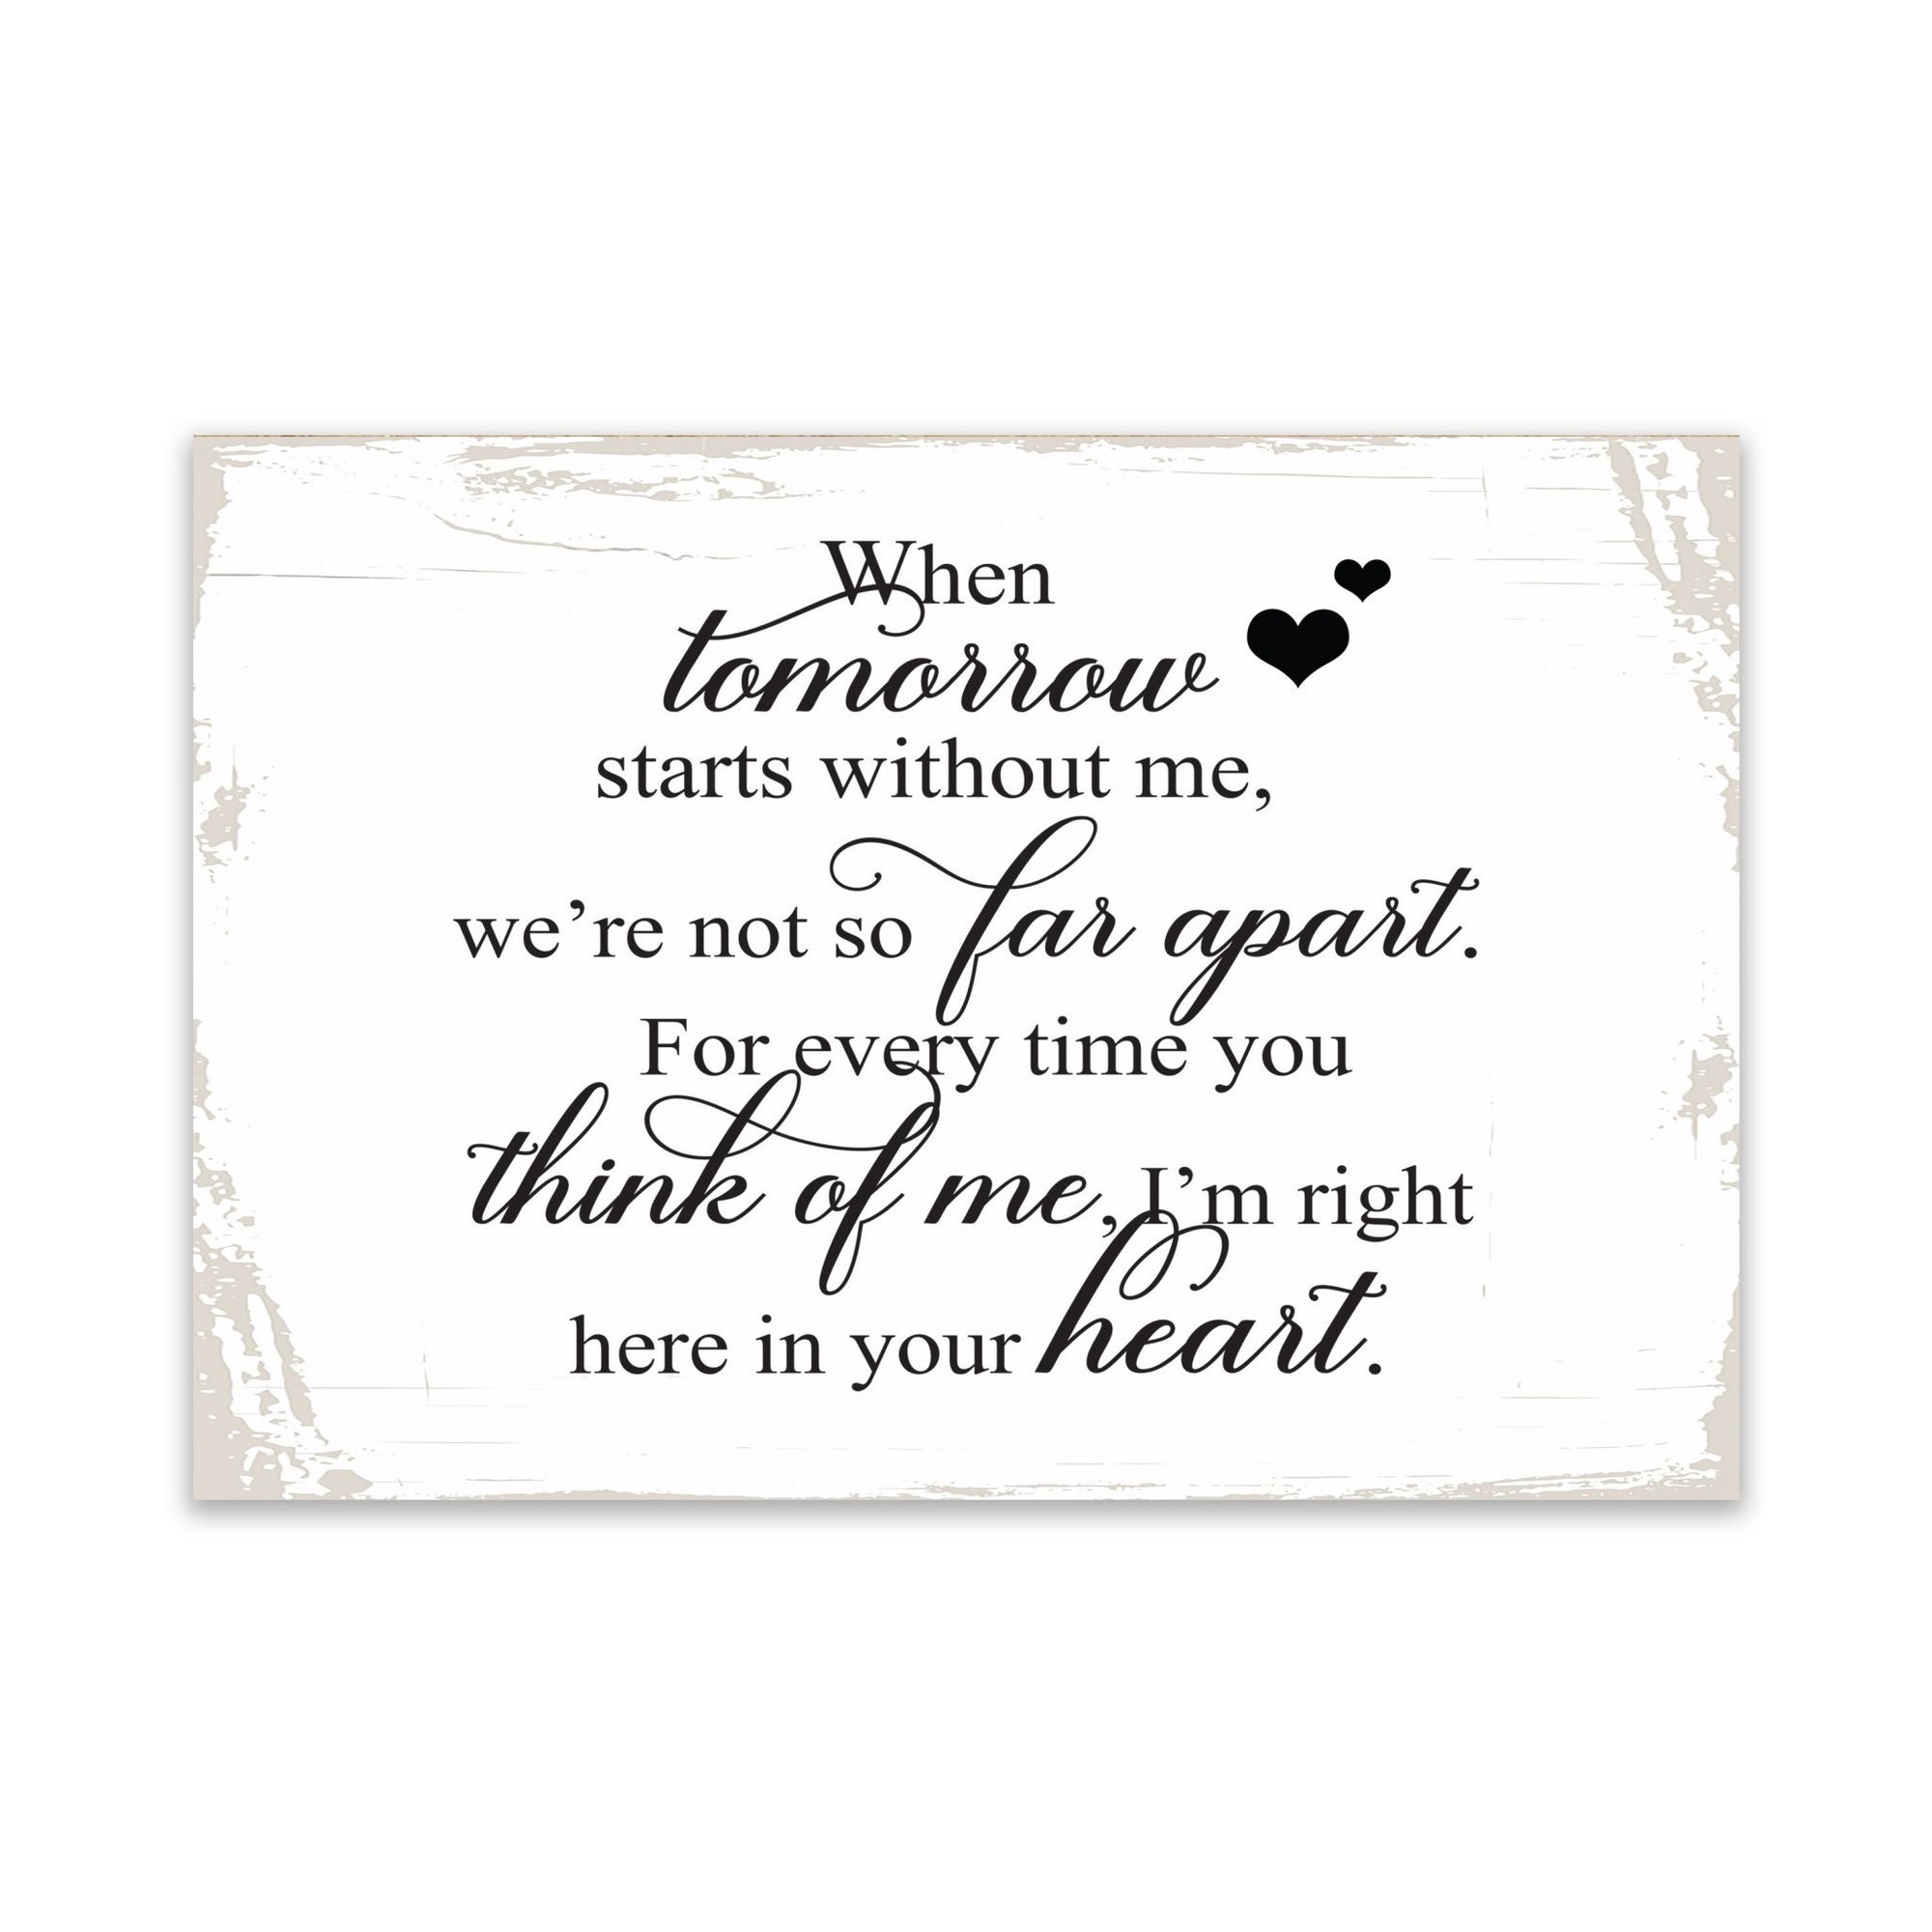 Modern Inspirational Memorial 5.5x 8 inches Wooden Sign When Tomorrow Starts - Plaque Tabletop Decoration Loss of Loved One Bereavement Sympathy Keepsake - LifeSong Milestones